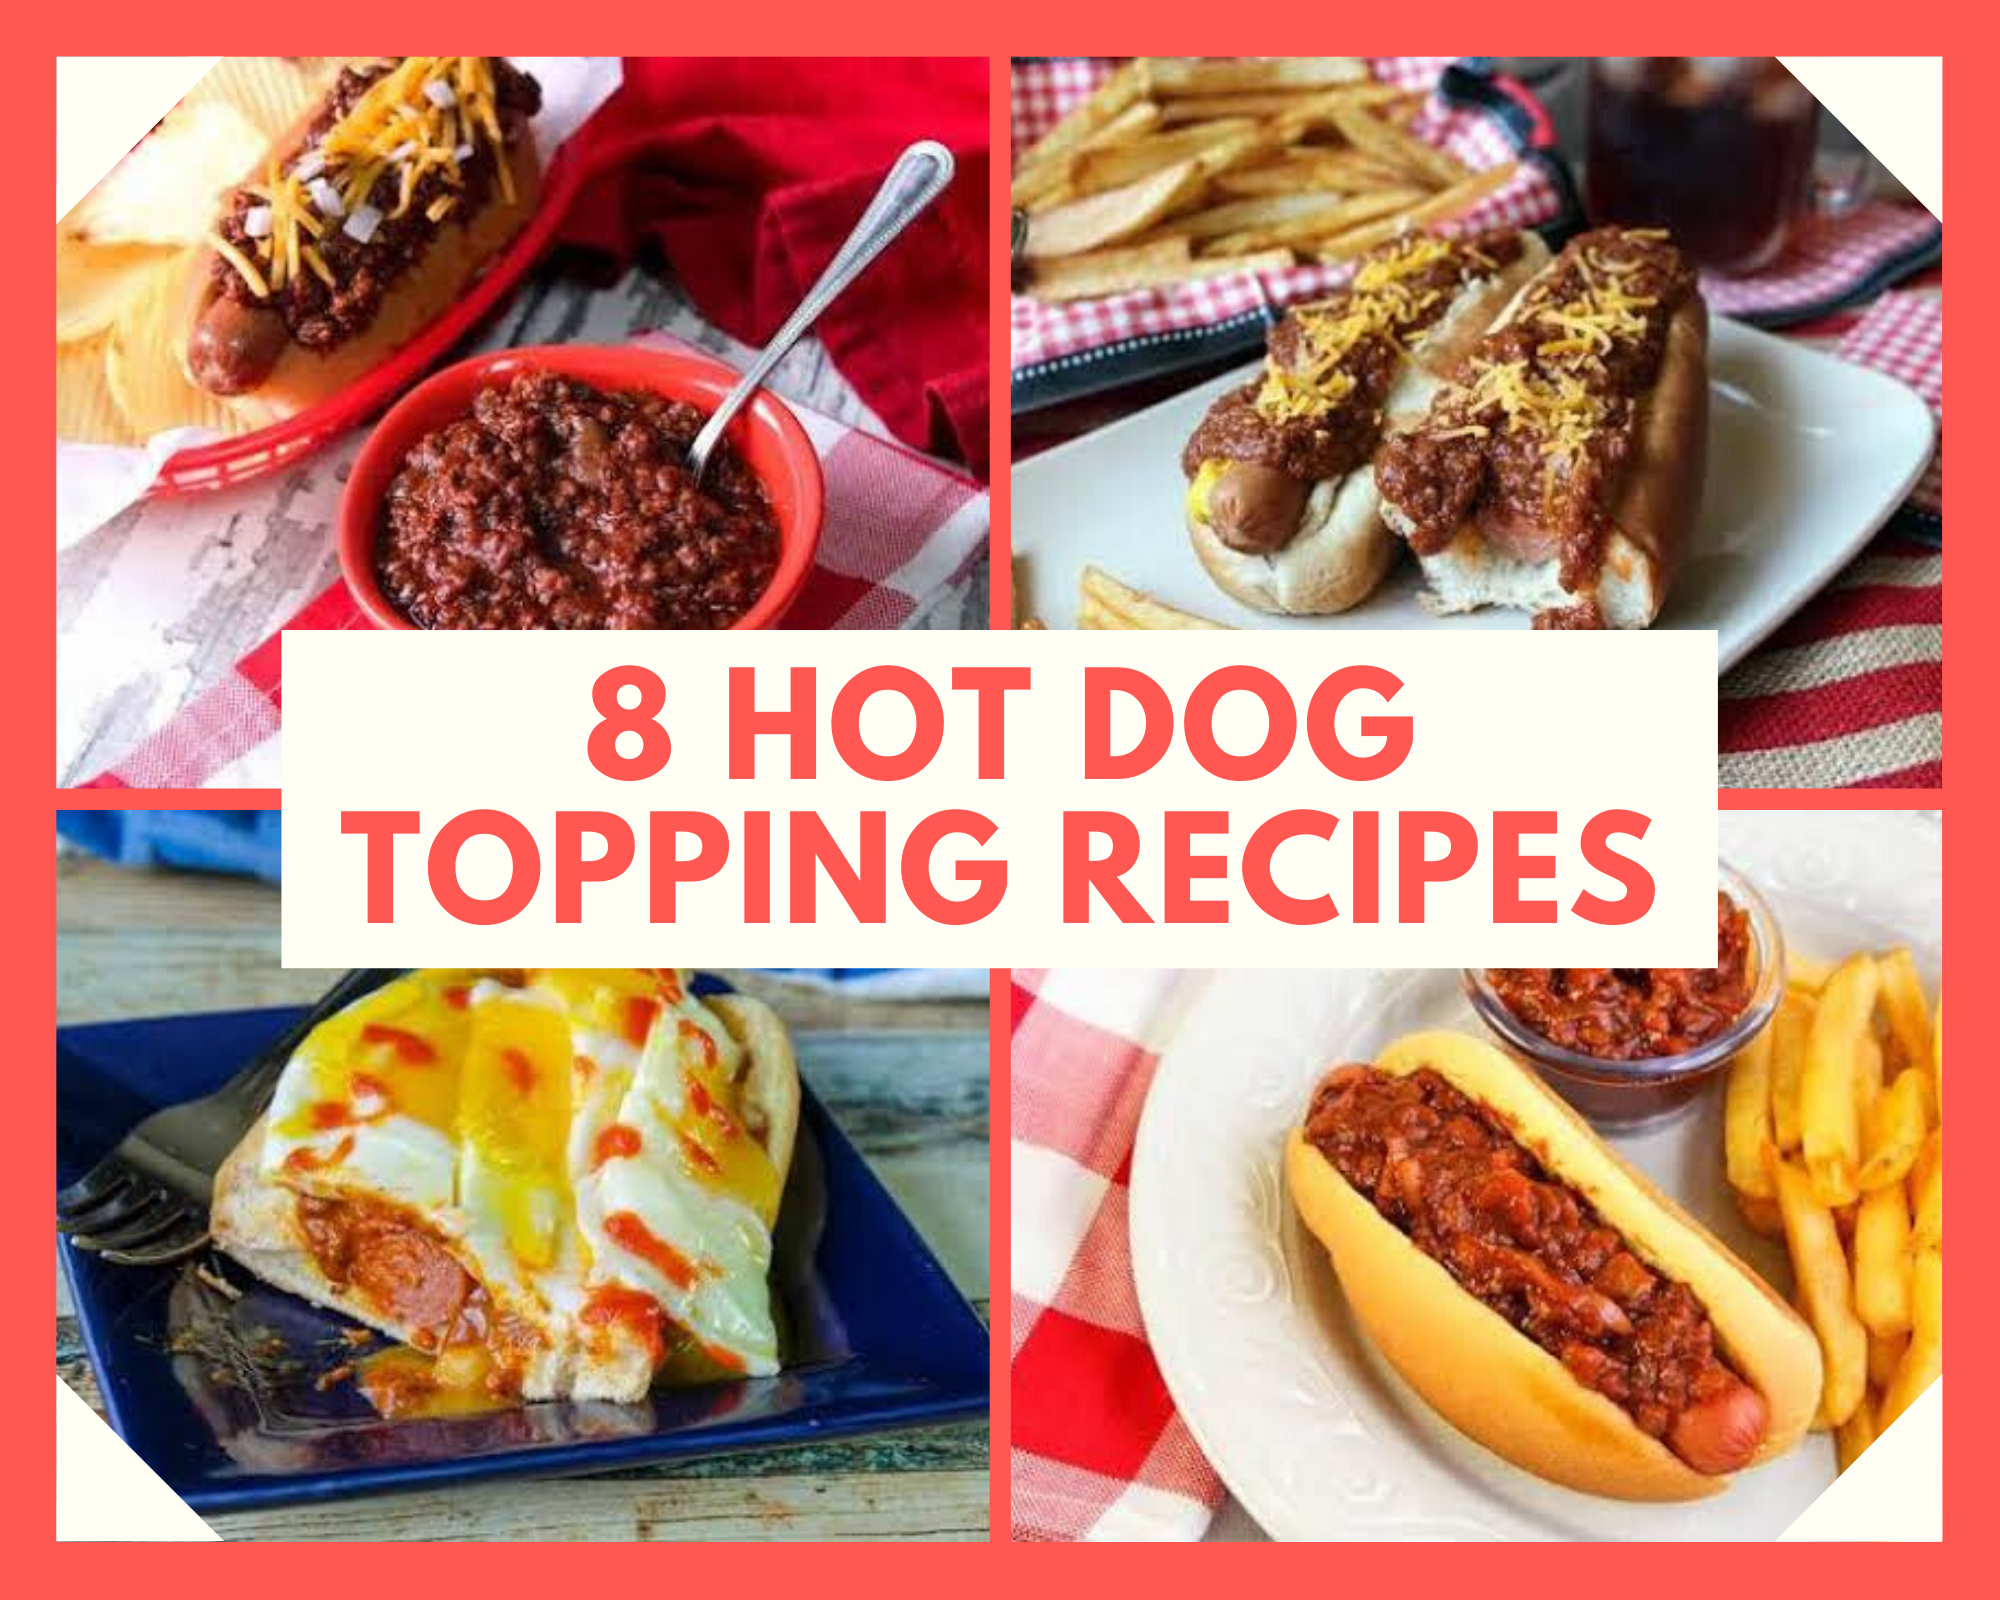 Hot dogs topped with chili and other toppings